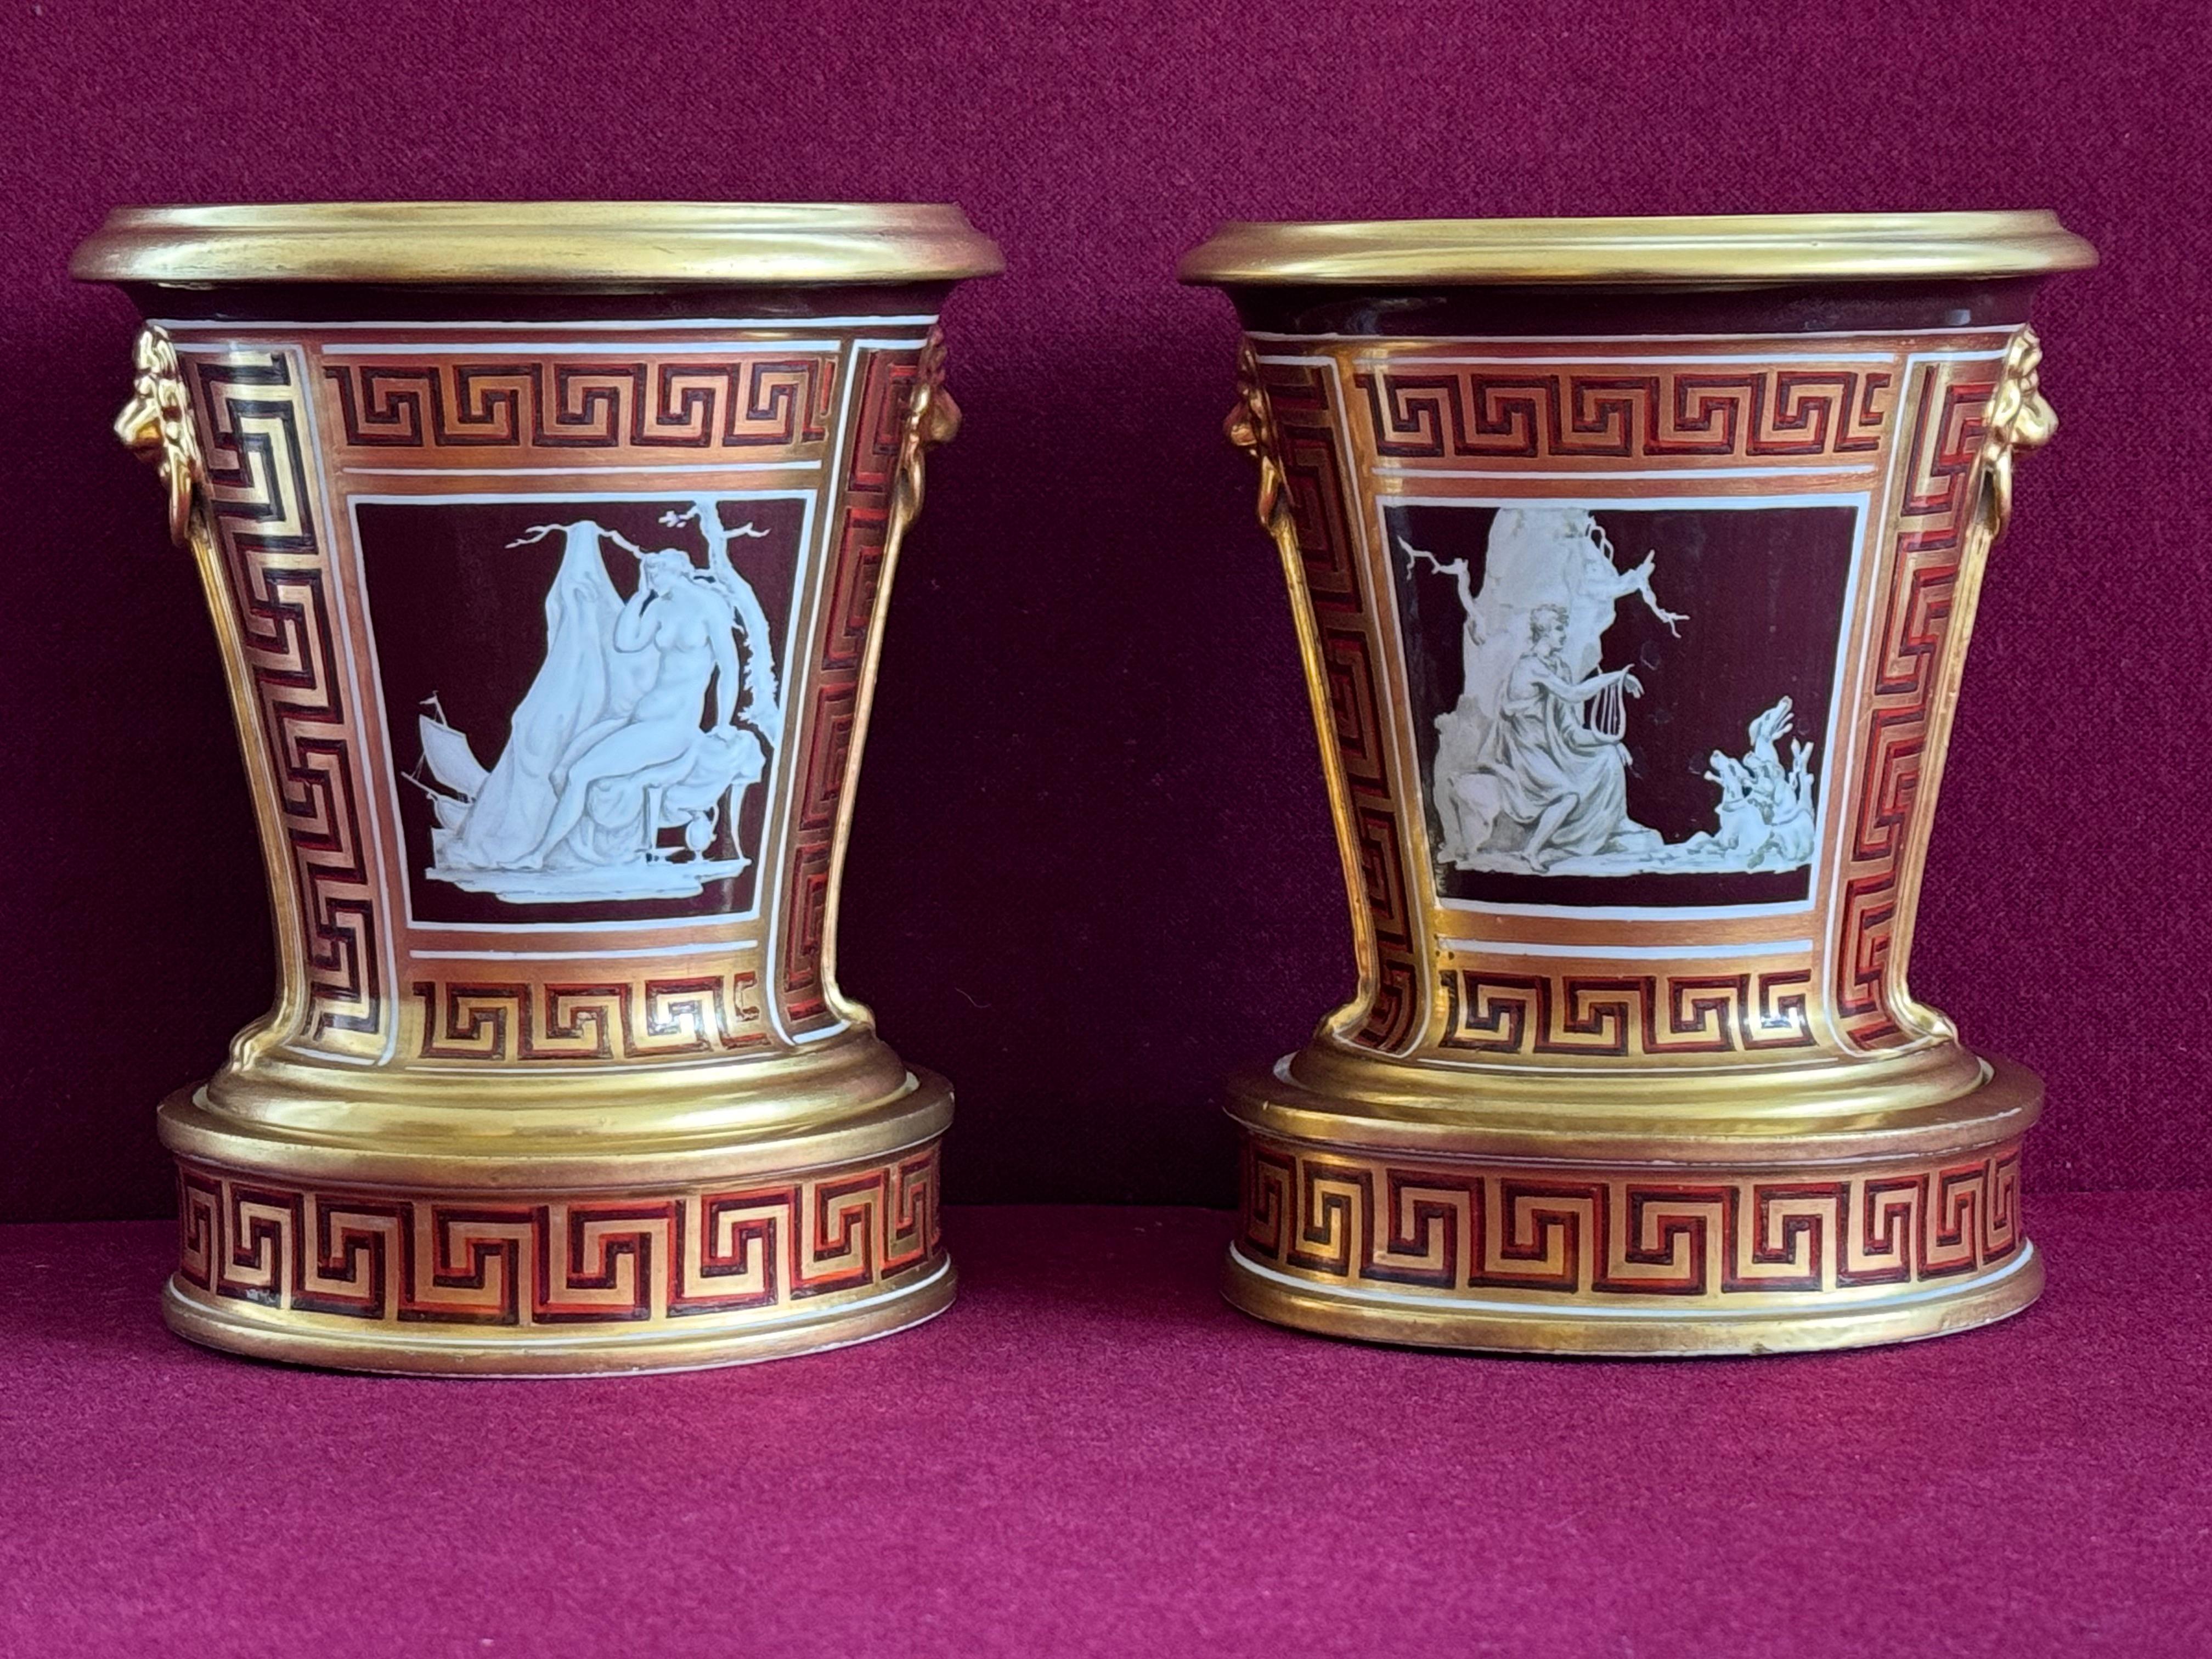 A rare pair of Coalport porcelain cache pots c.1802-1805. Each cache pot, painted in the London studio of Thomas Baxter most probably by Thomas Baxter junior, ‘en grisaille’ with classical scenes depicting Ariadne abandoned by Theseus and Orpheus